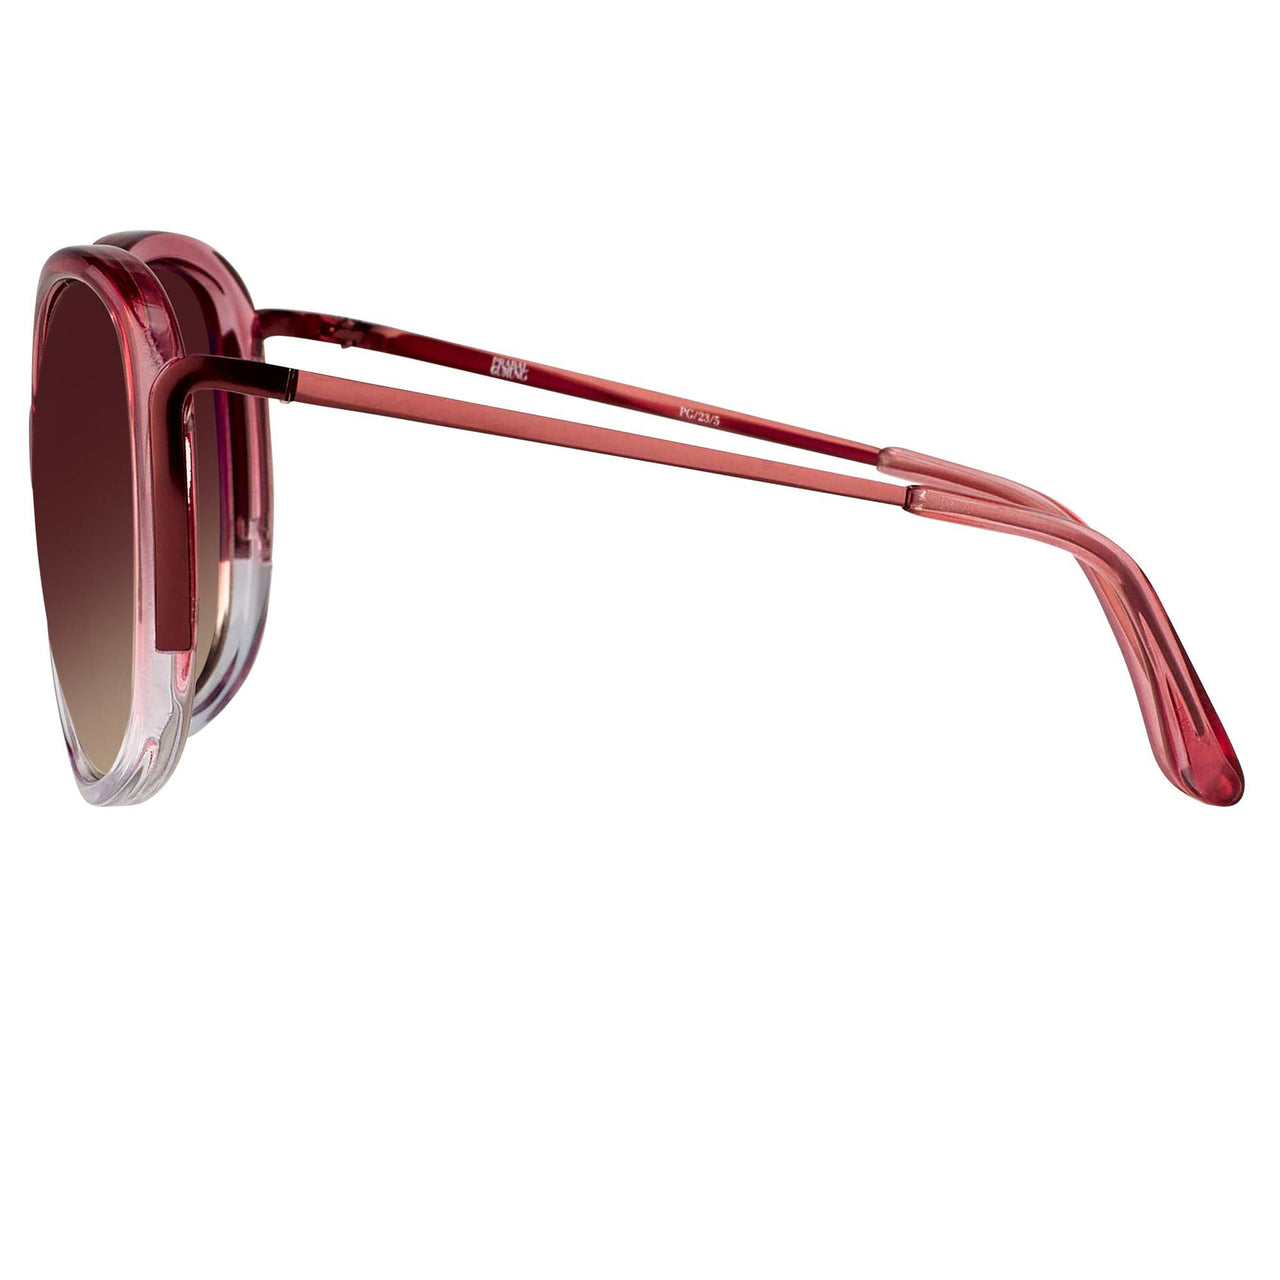 Prabal Gurung Sunglasses Oversized Female Pink to Clear/Metallic Pink Frame Category 1 Pink Gradient Lenses PG23C5SUN - Watches & Crystals